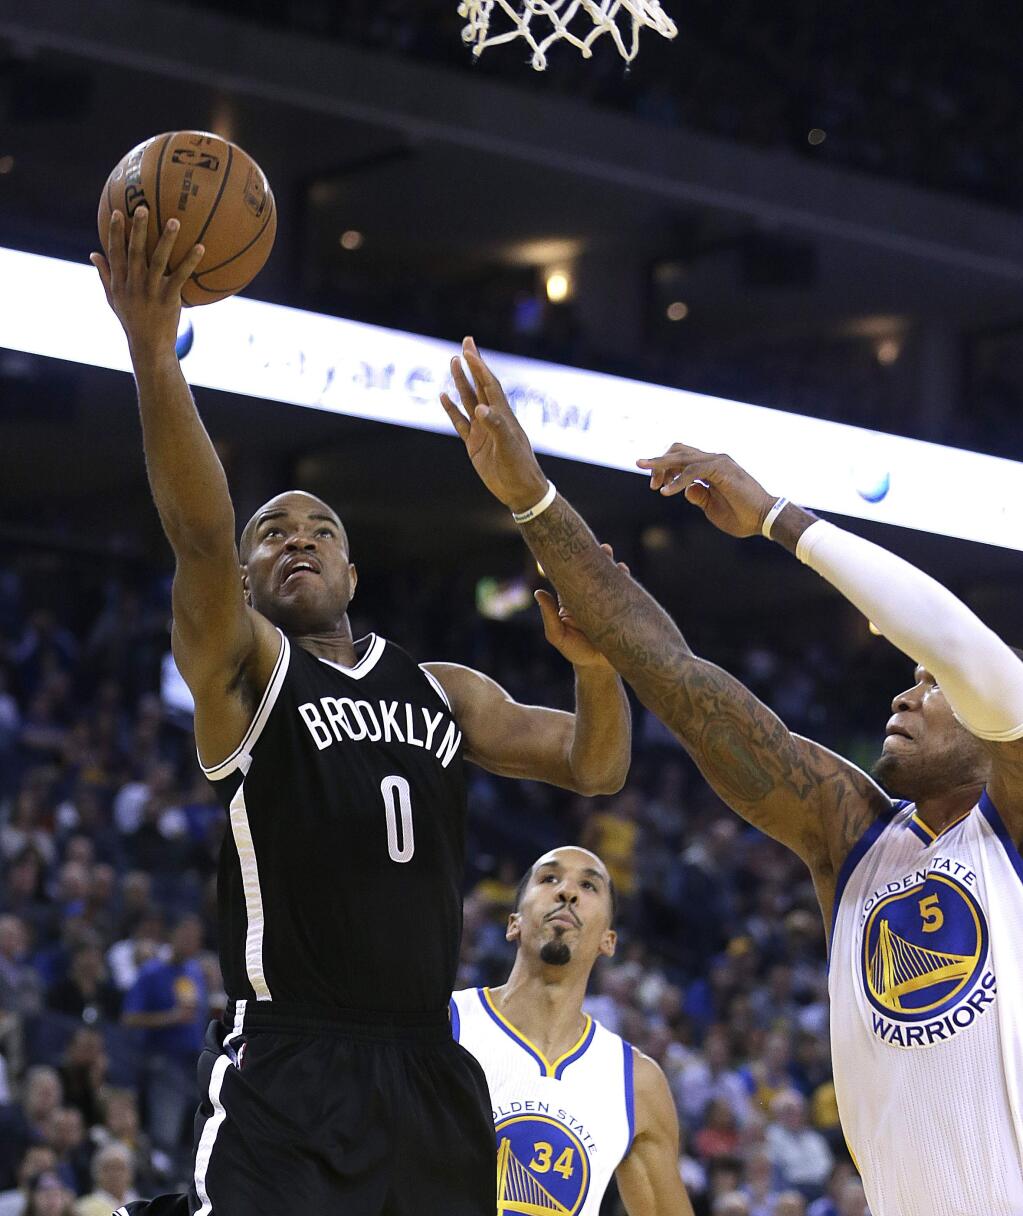 Brooklyn Nets' Jarrett Jack, left, lays up a shot past Golden State Warriors' Marreese Speights (5) during the first half of an NBA basketball game Thursday, Nov. 13, 2014, in Oakland, Calif. (AP Photo/Ben Margot)